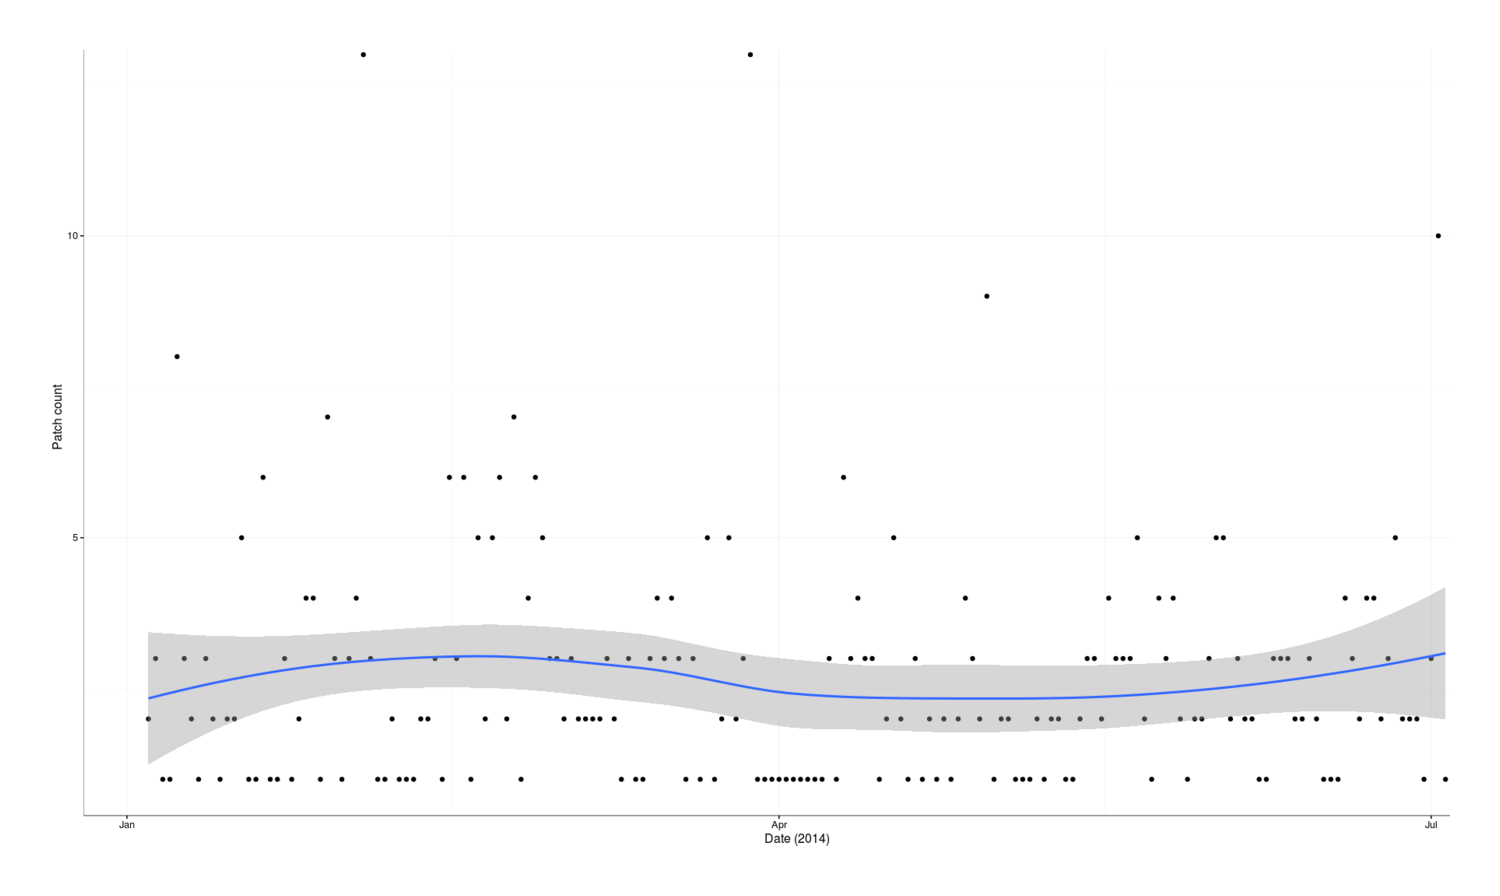 Plot of patch creations (y-axis) versus date (x-axis): January 2016 to July 2016